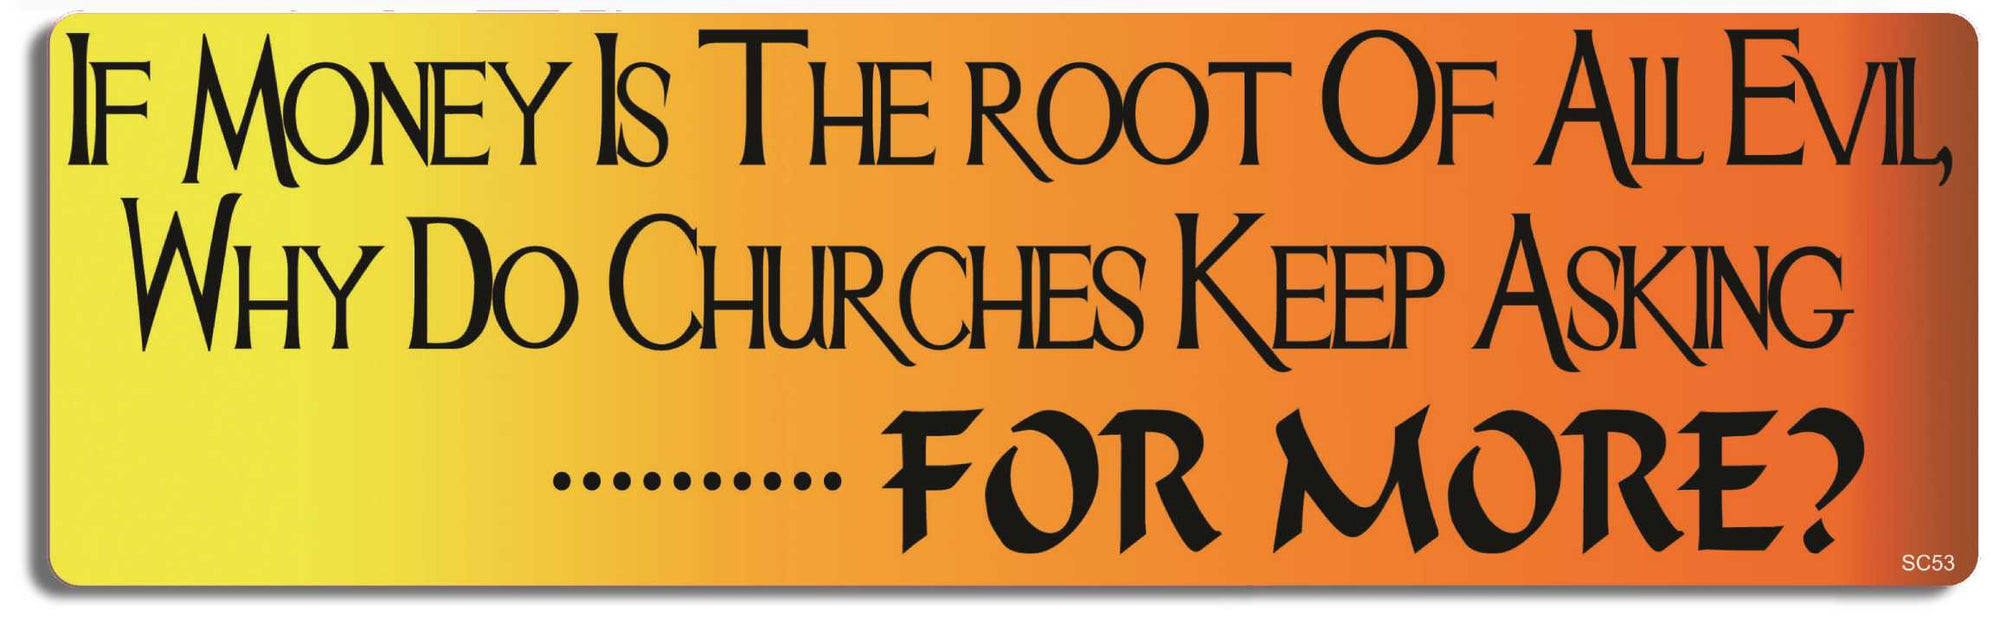 If money is the root of all evil, why do Churches keep asking for more? - 3" x 10" Bumper Sticker--Car Magnet- -  Decal Bumper Sticker-political Bumper Sticker Car Magnet If money is the root of all evil,-  Decal for carsReligion